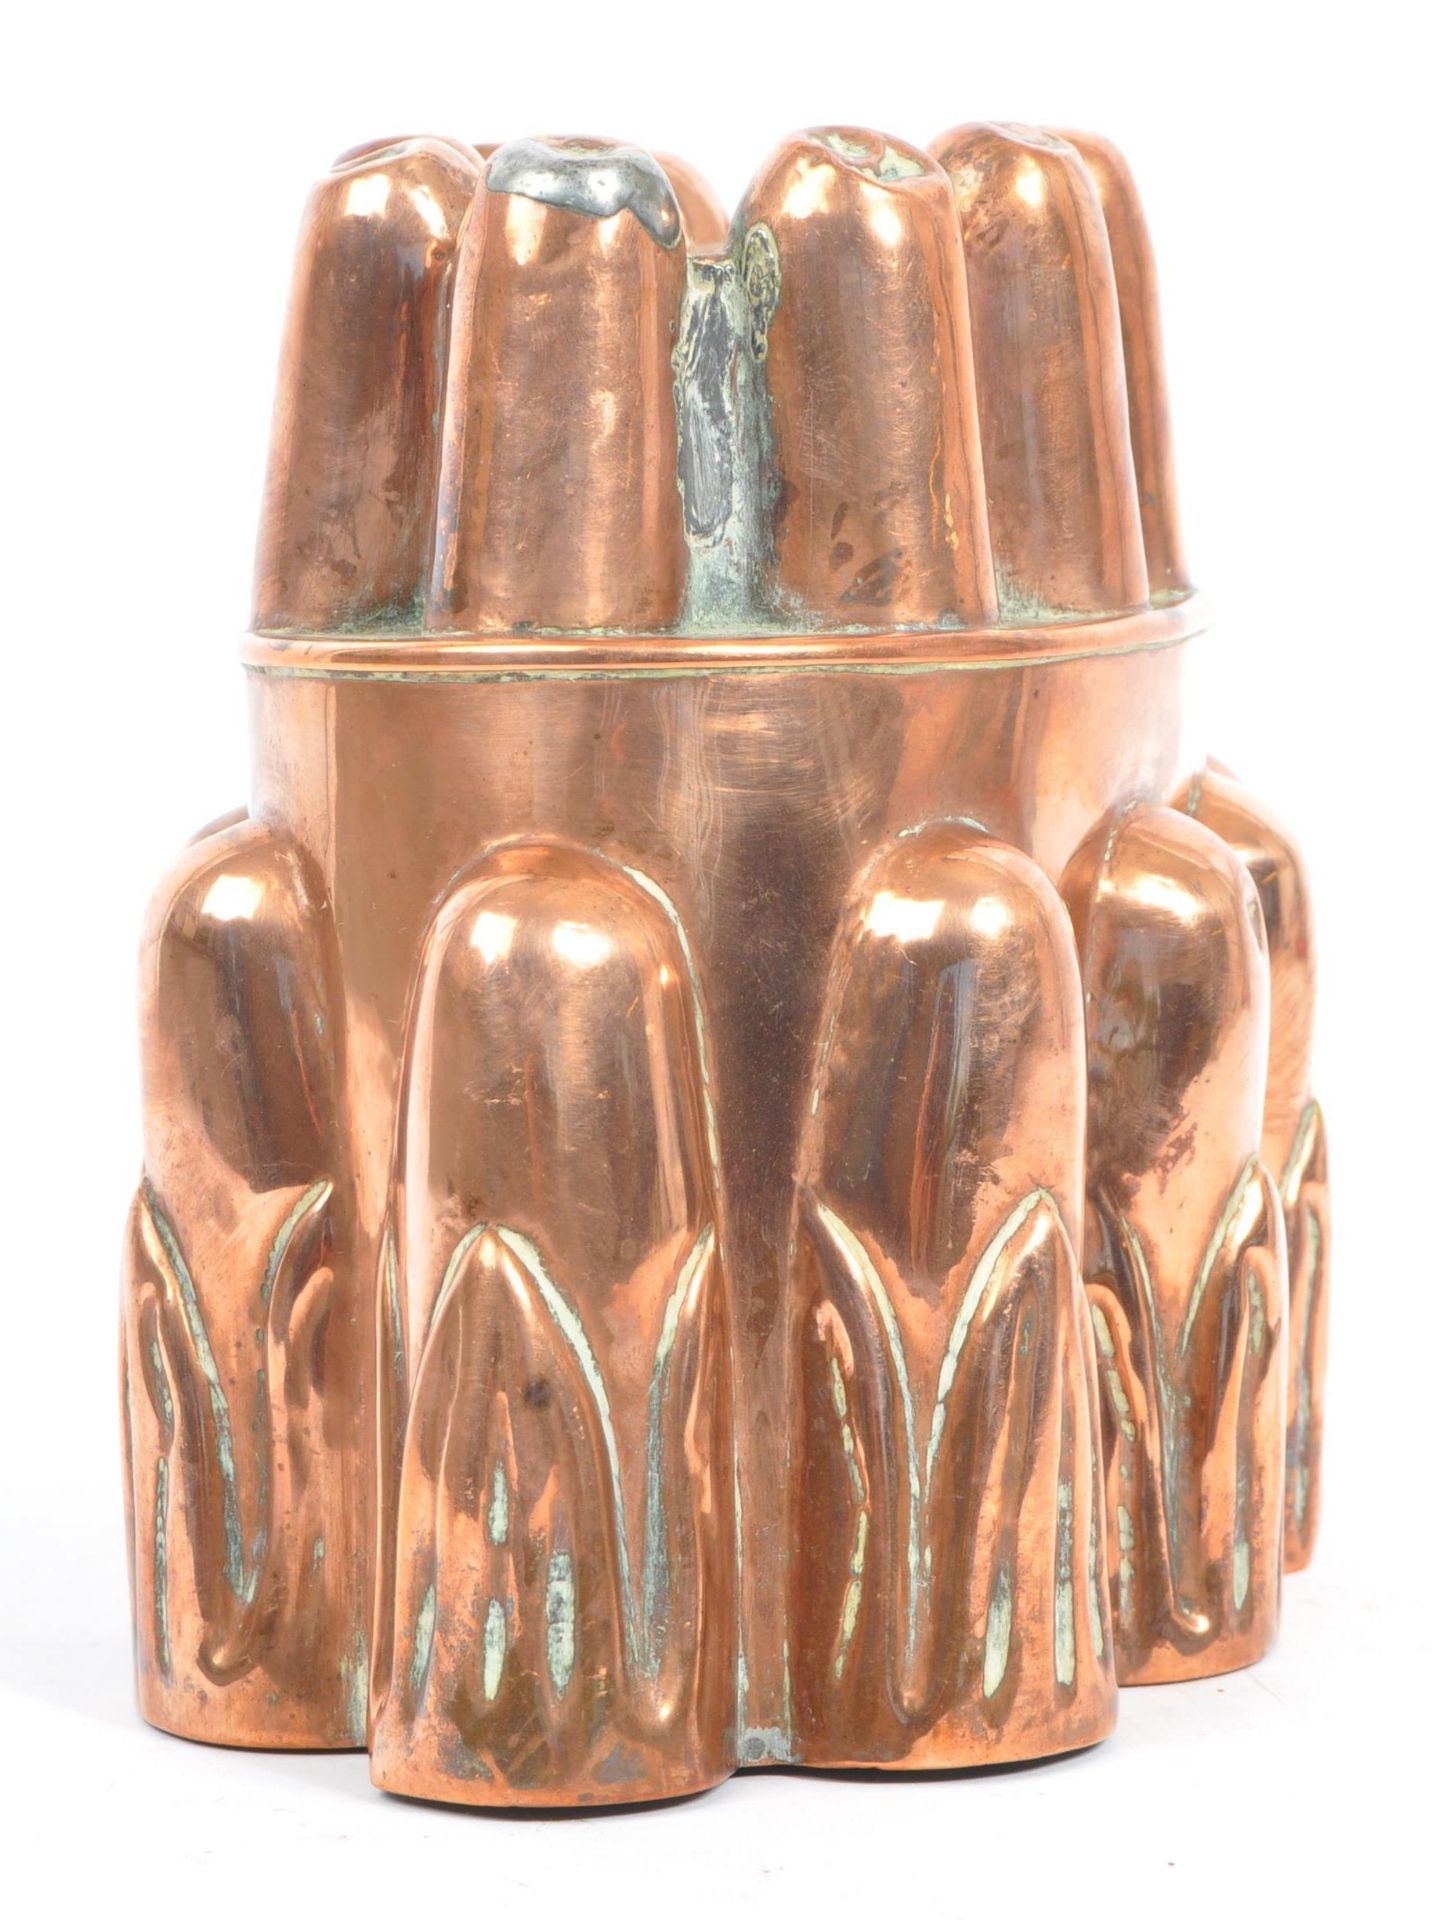 LARGE 19TH CENTURY VICTORIAN COPPER JELLY MOULD - Image 2 of 5